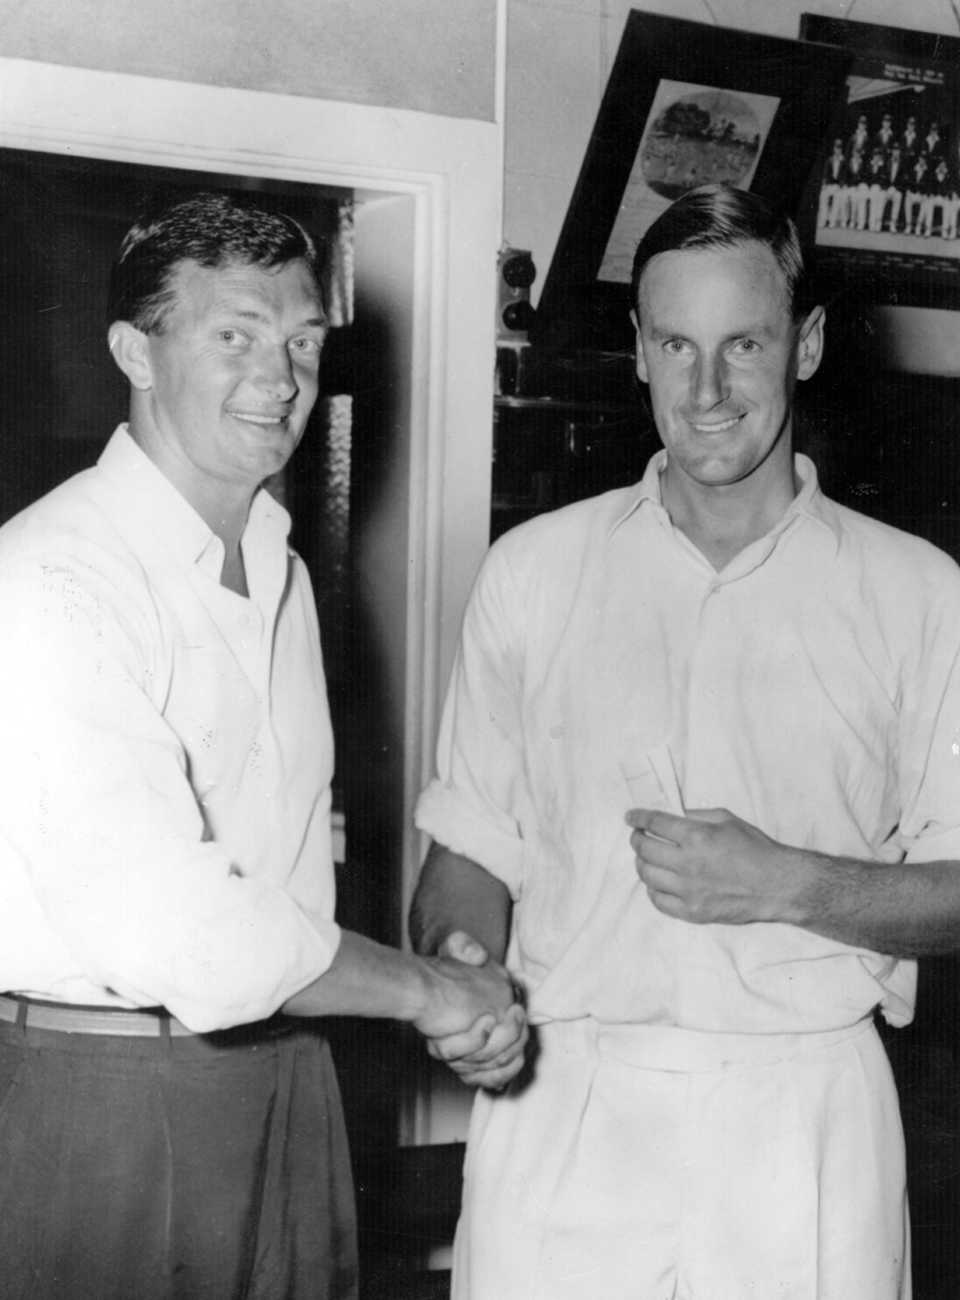 Australian captain Richie Benaud shakes hands with England captain Peter May after Australia regained the Ashes